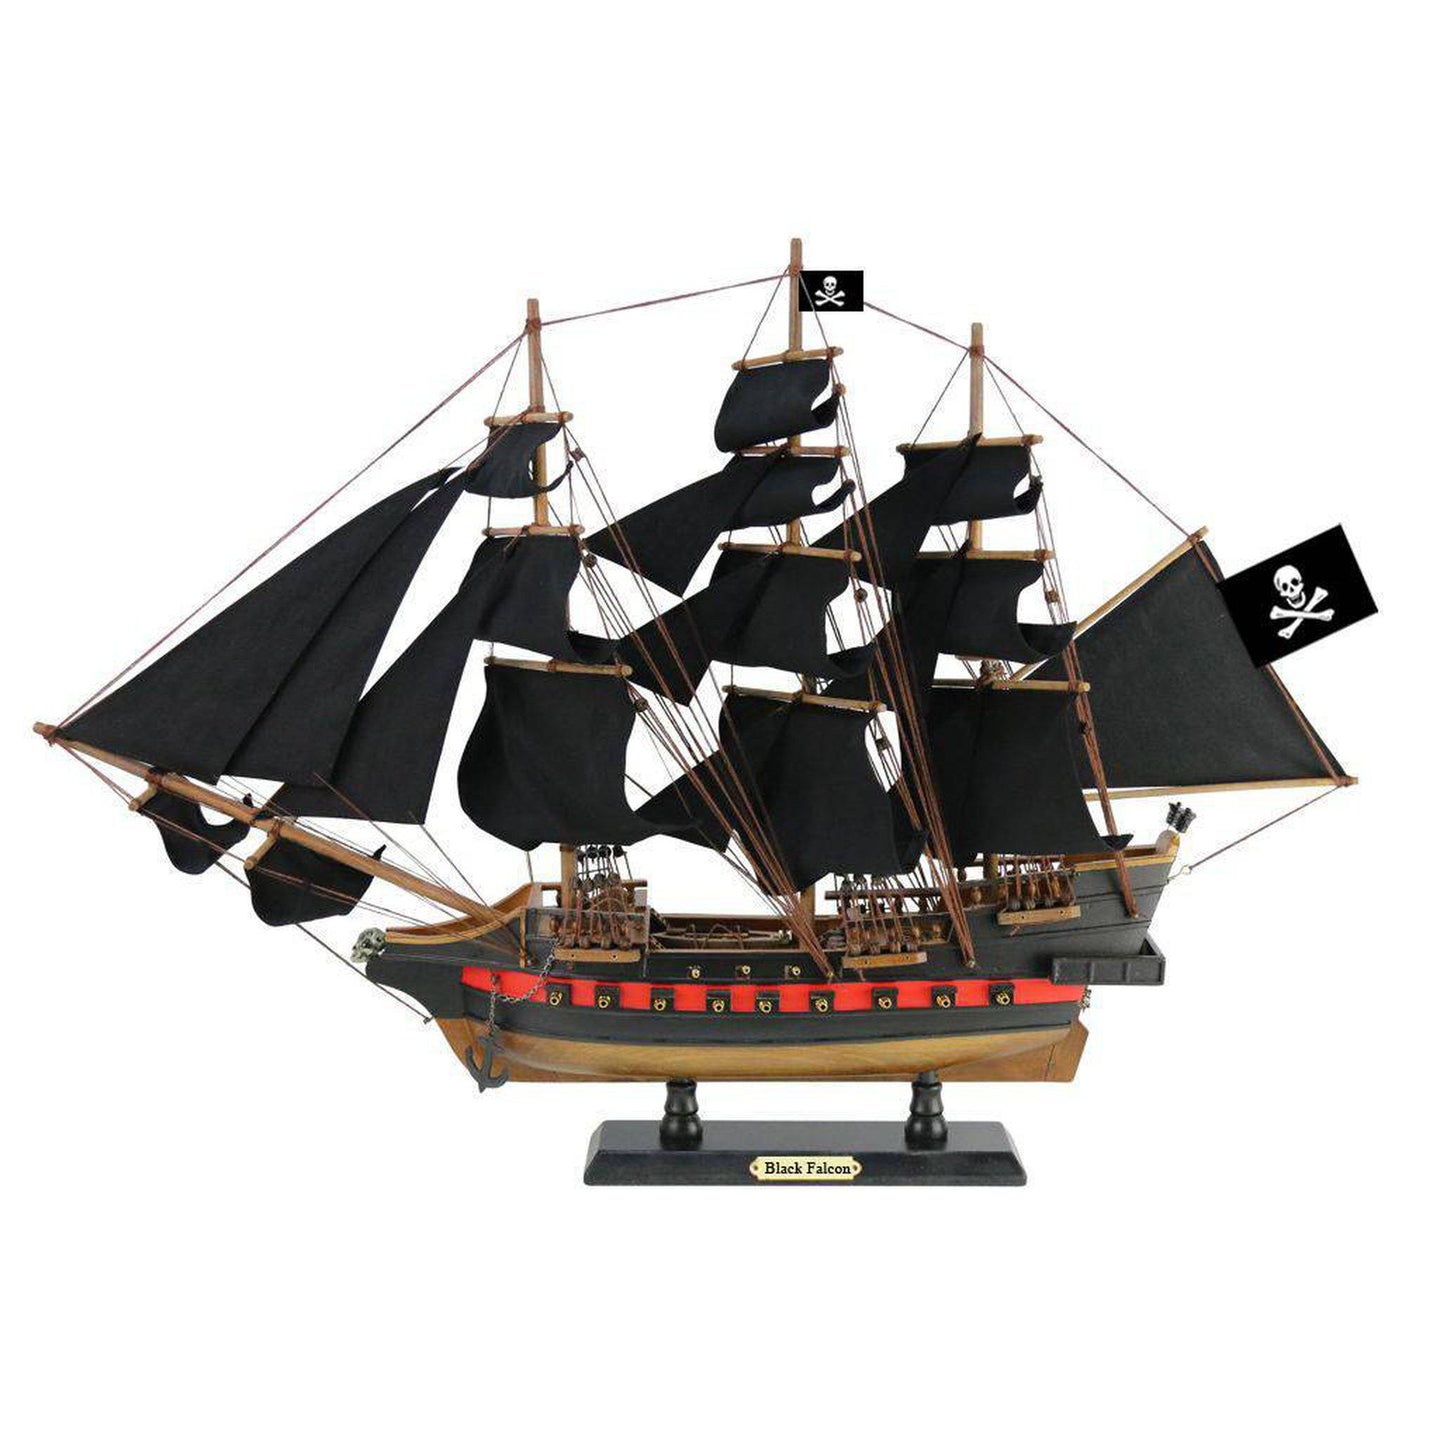 Handcrafted Model Ships Wooden Captain Kidd's Black Falcon Black Sails Limited Model Pirate Ship 26 Black-Falcon-26-Black-Sails